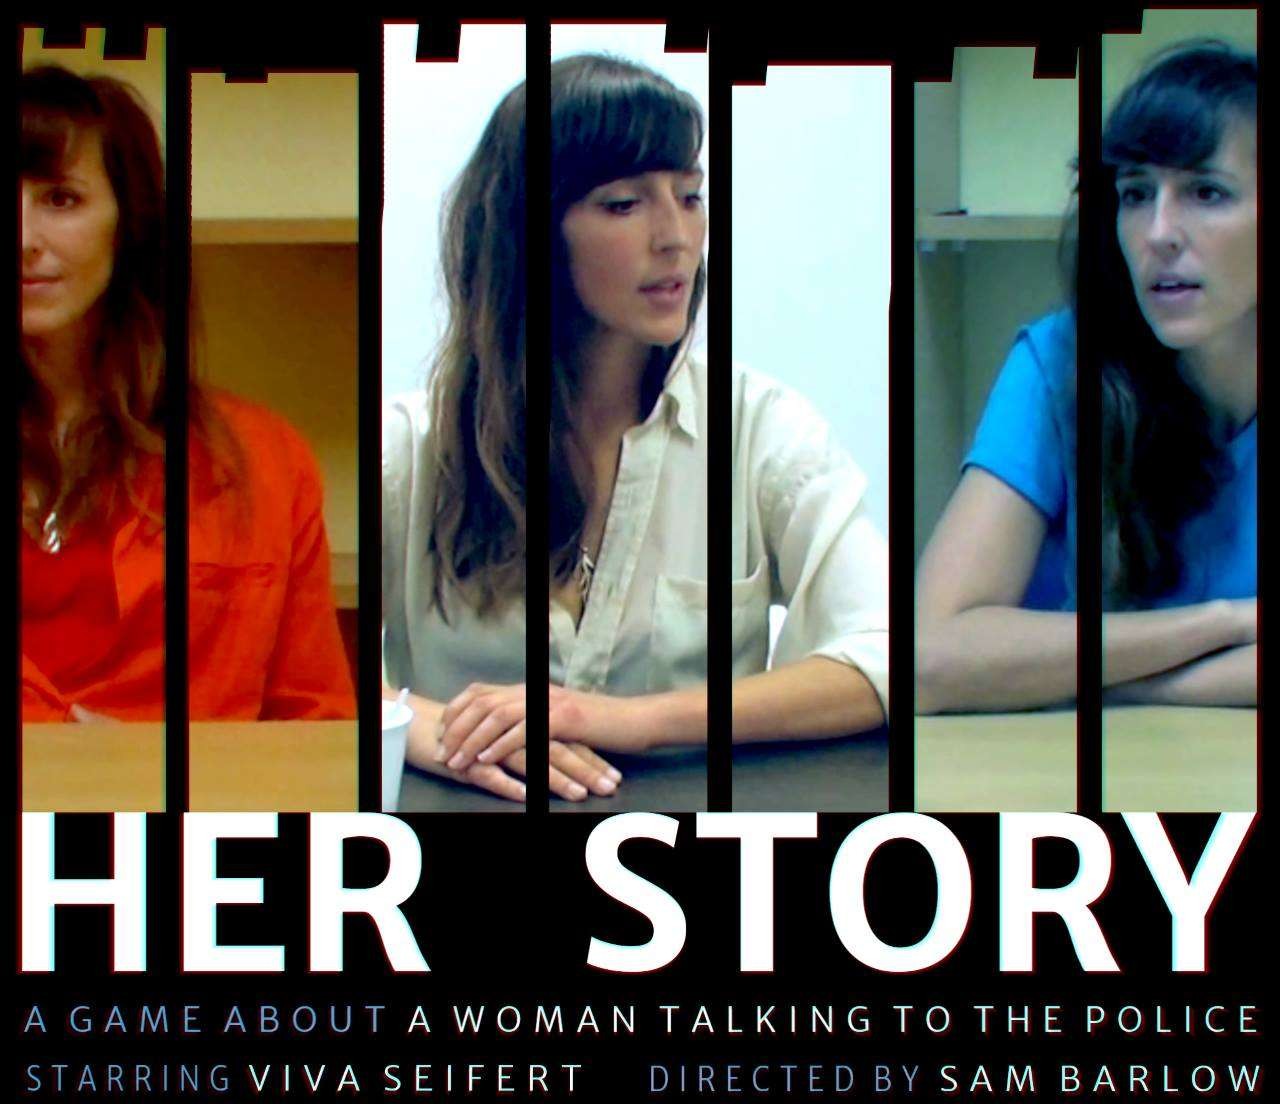 Her Story earned almost half its sales on iOS, says creator